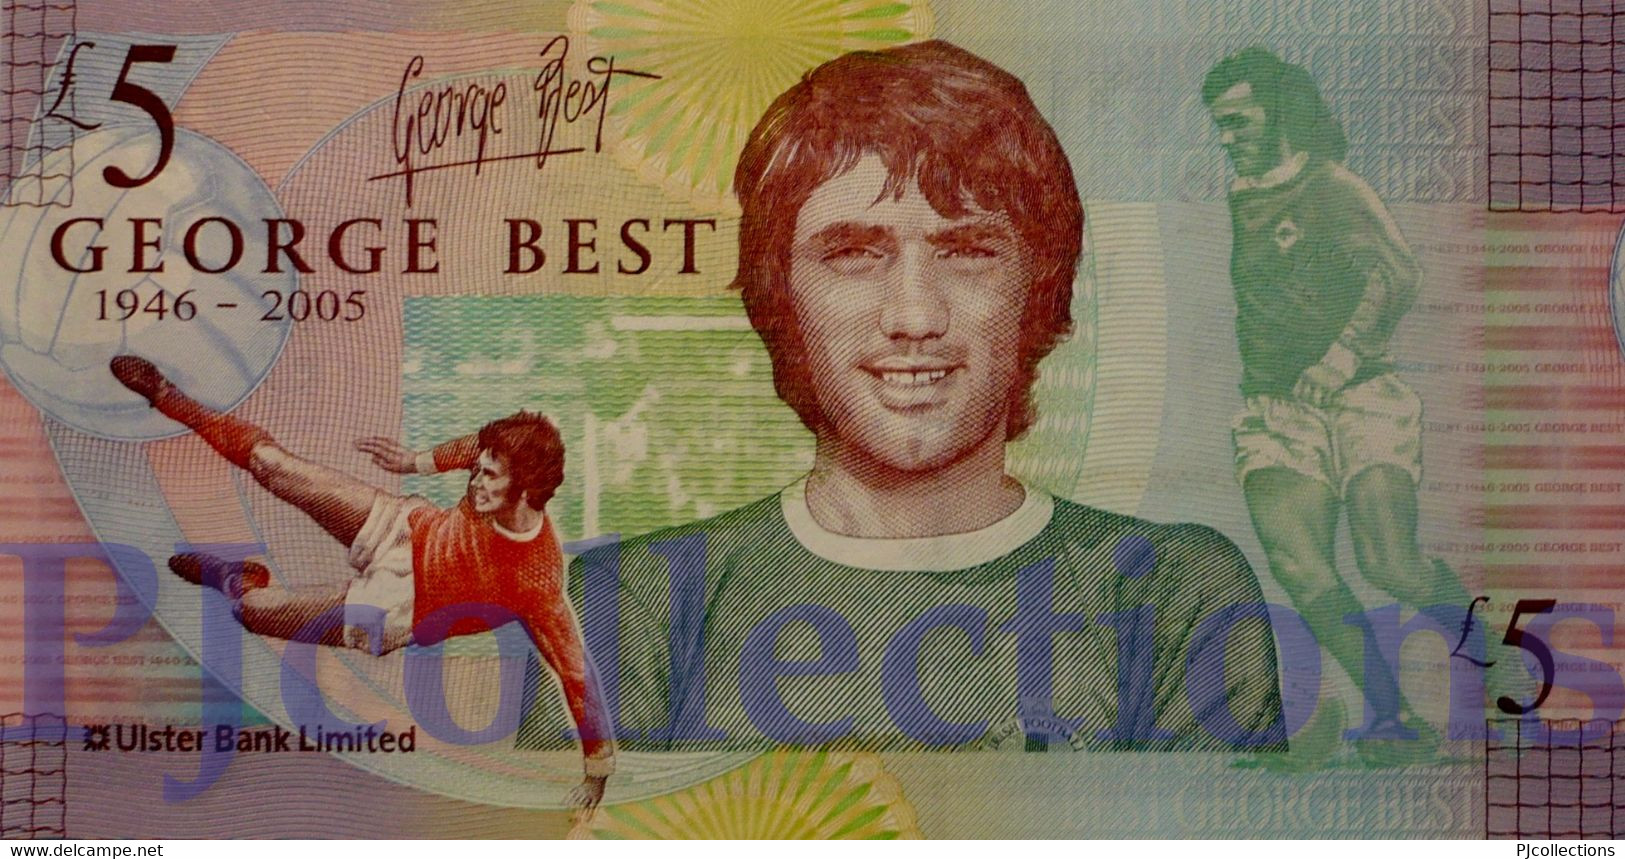 IRELAND NOTHERN 5 POUNDS 2006 PICK 339 "GEORGE BEST" UNC - Irland